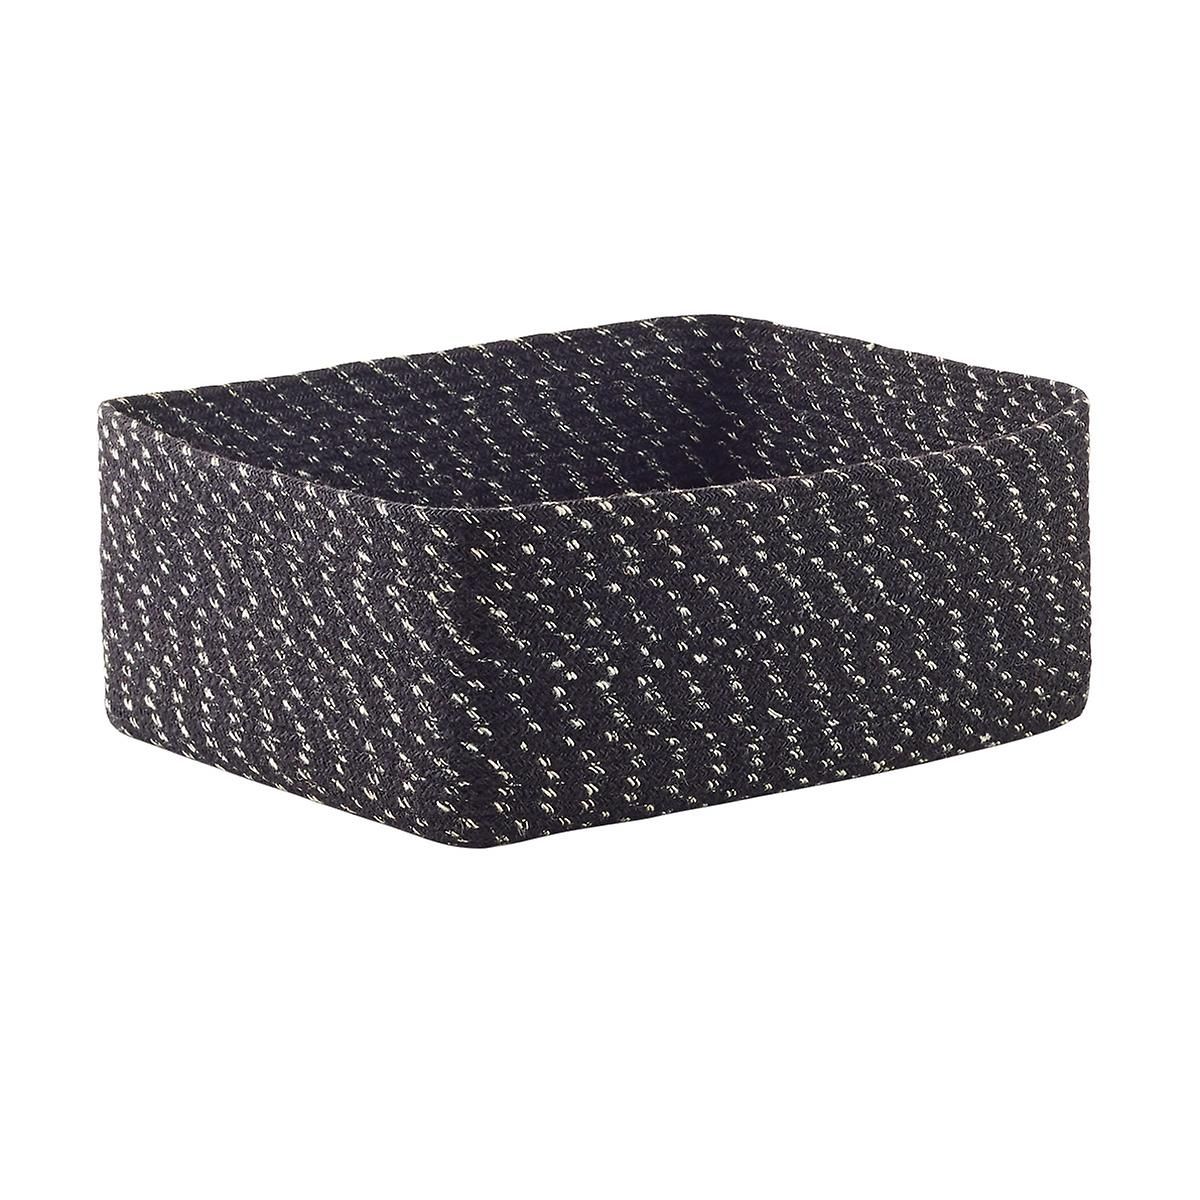 Large Seine Woven Storage Bin Black/Natural | The Container Store